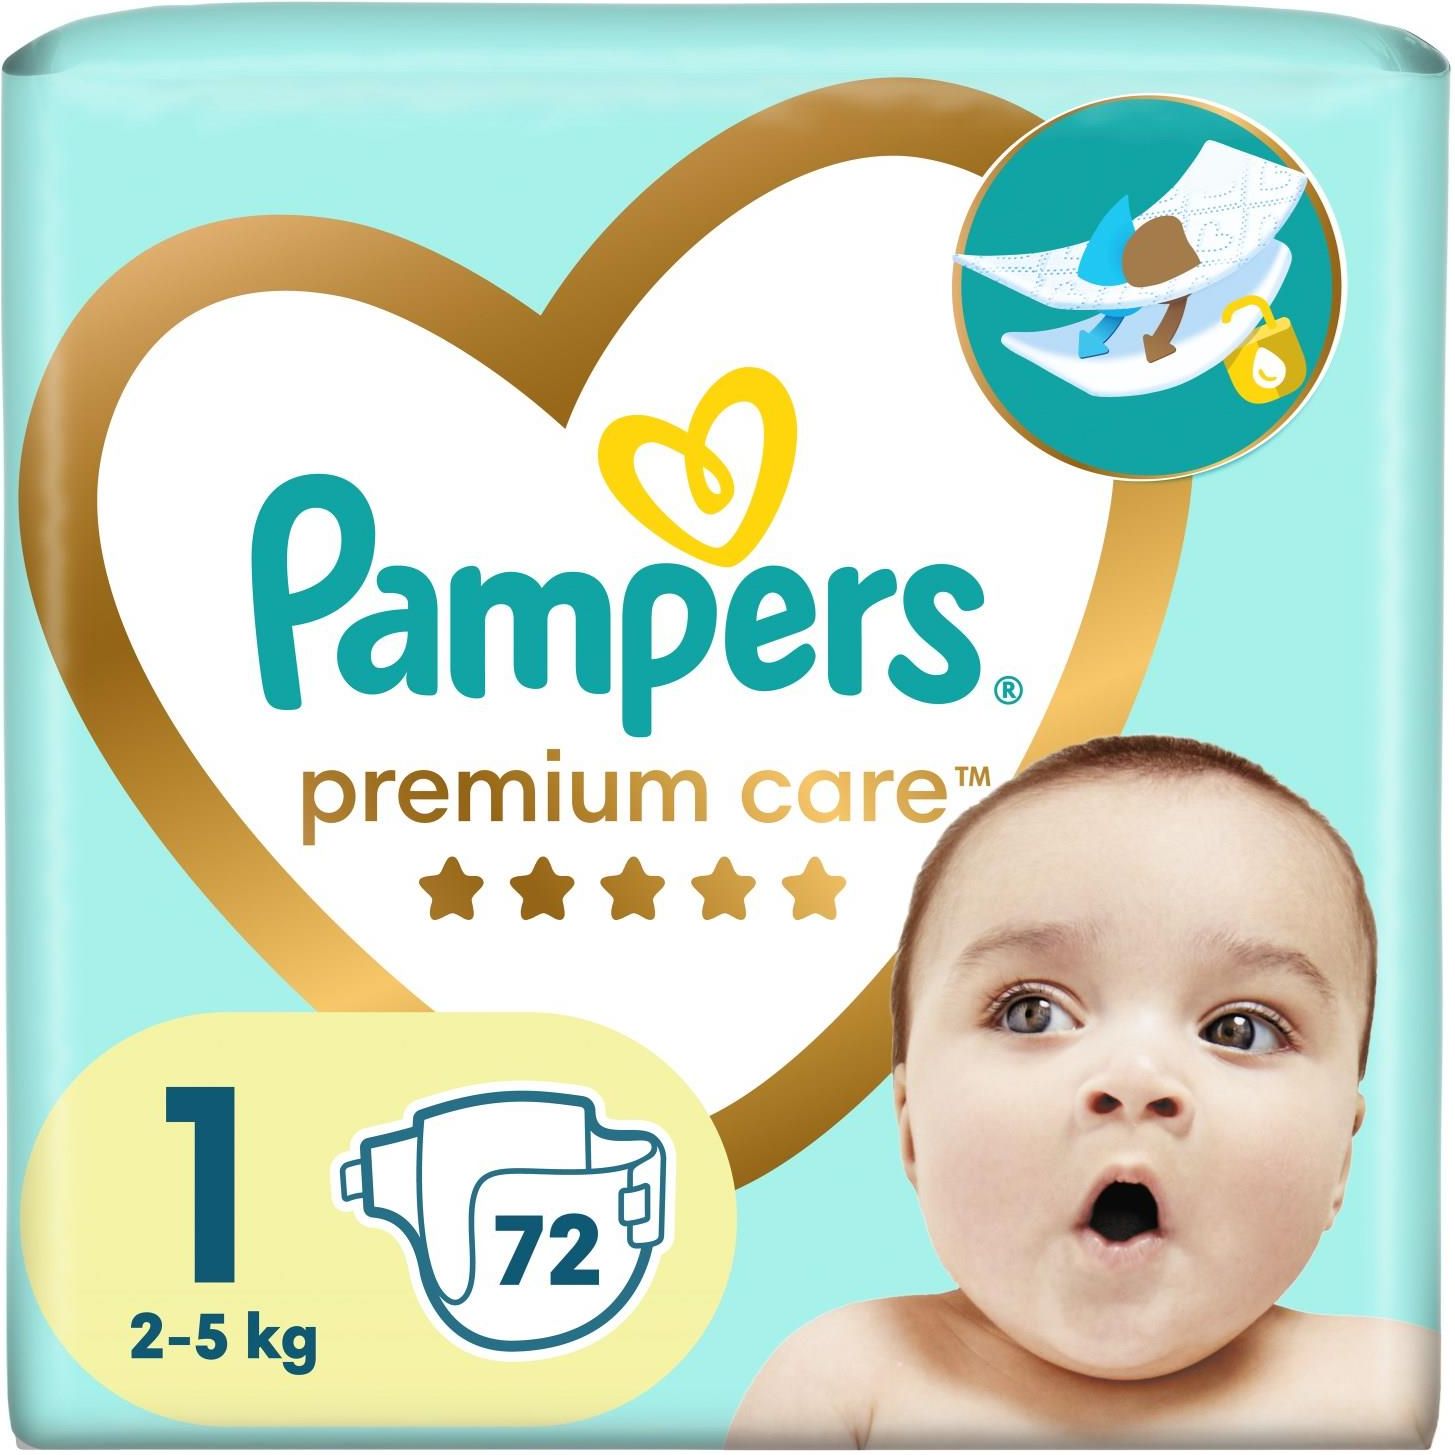 pampers 5 ceneo